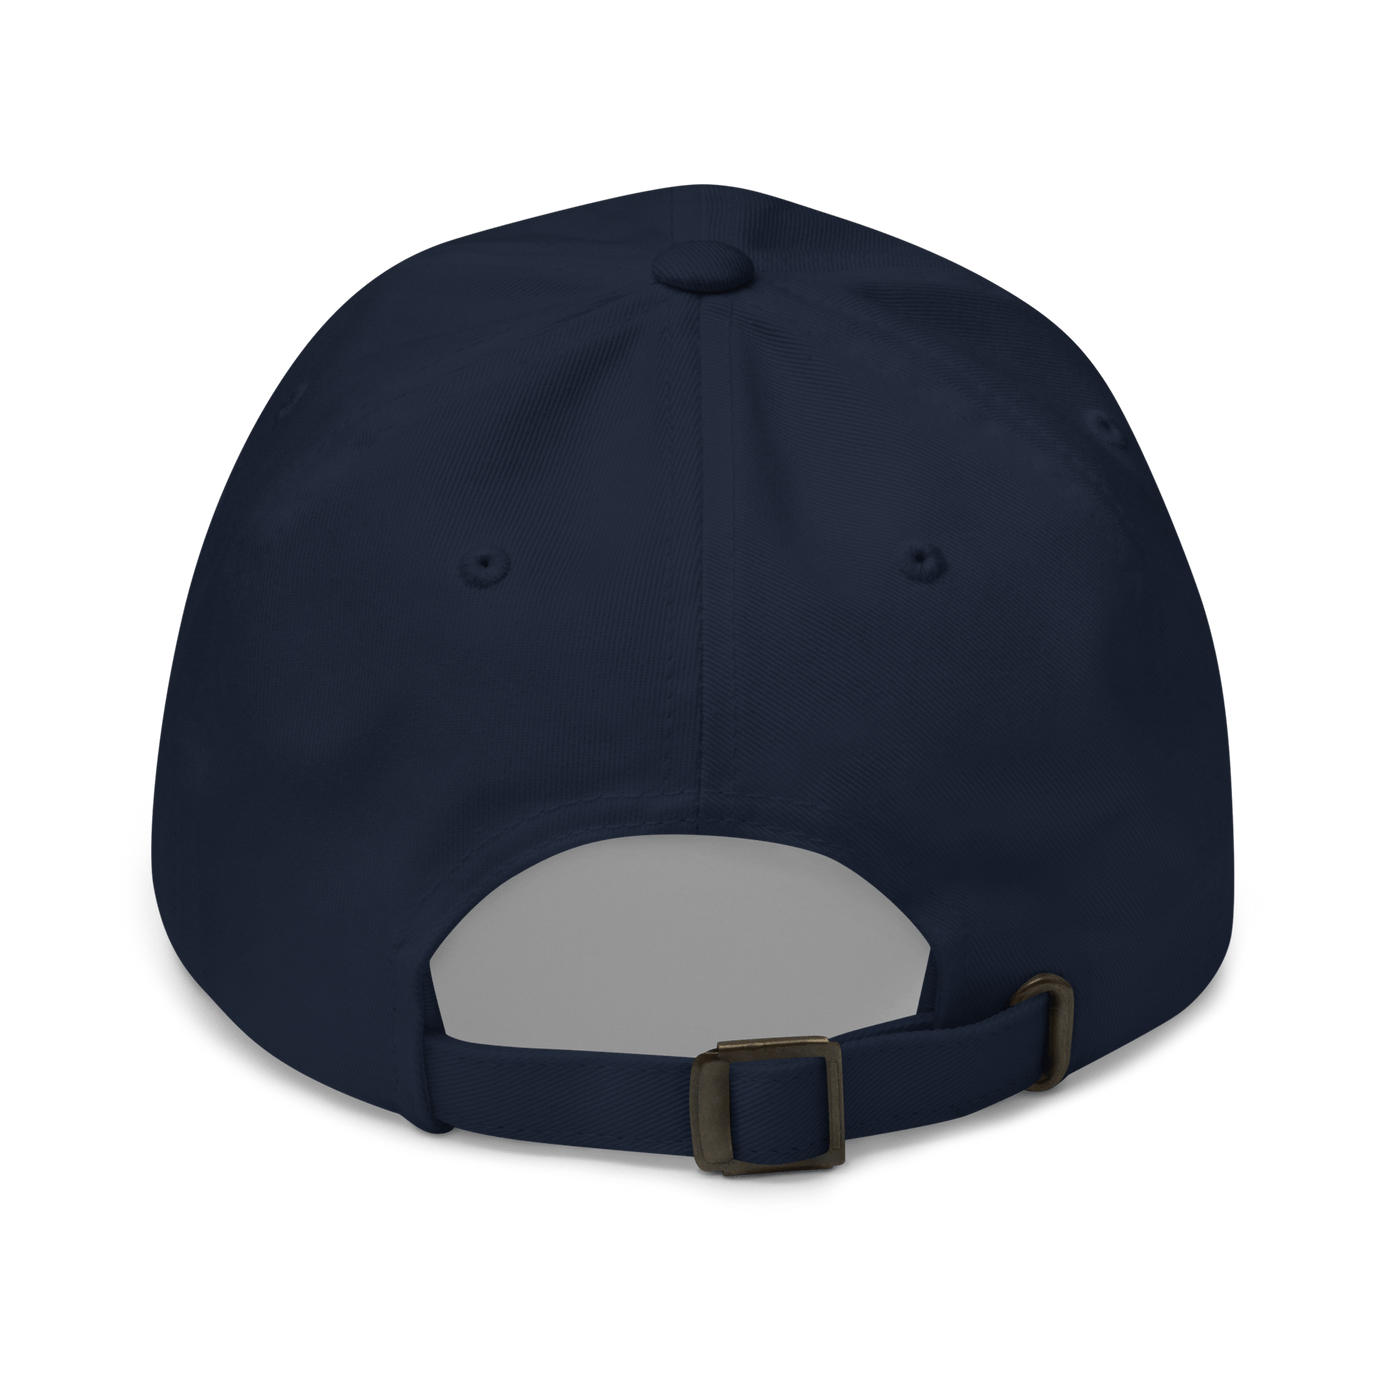 Kimchi Dad hat - Navy - - Just Another Cap Store